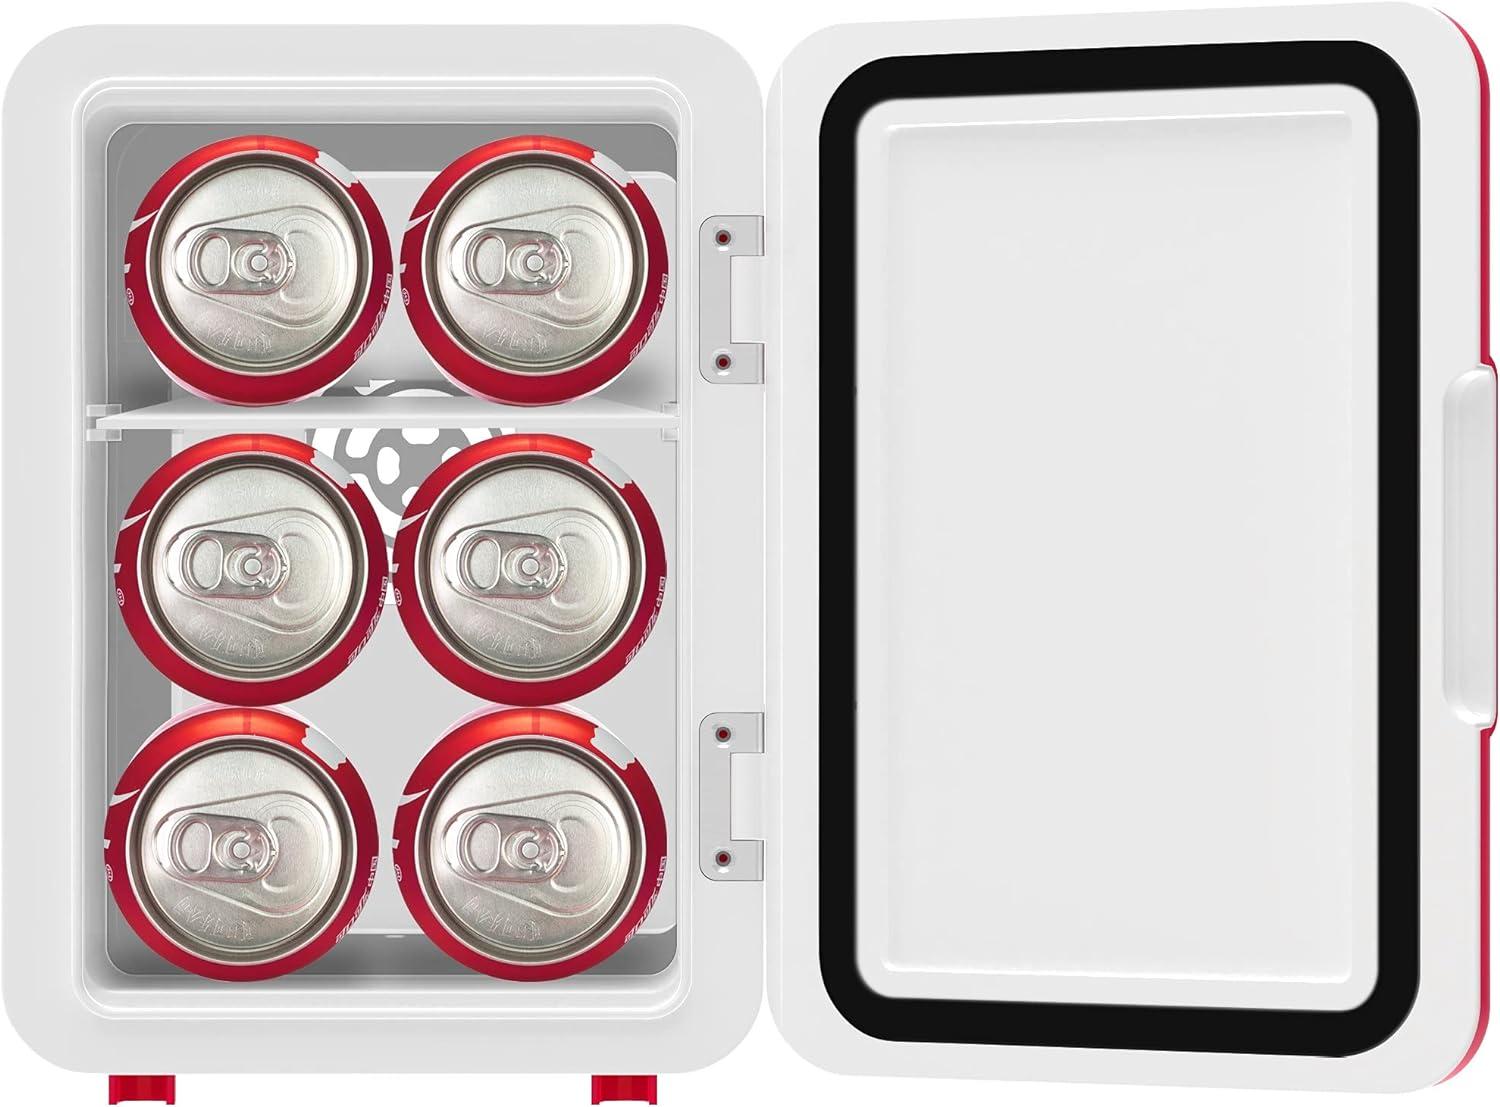 Budweiser Mini Portable Compact Personal Fridge Cooler for $16.24